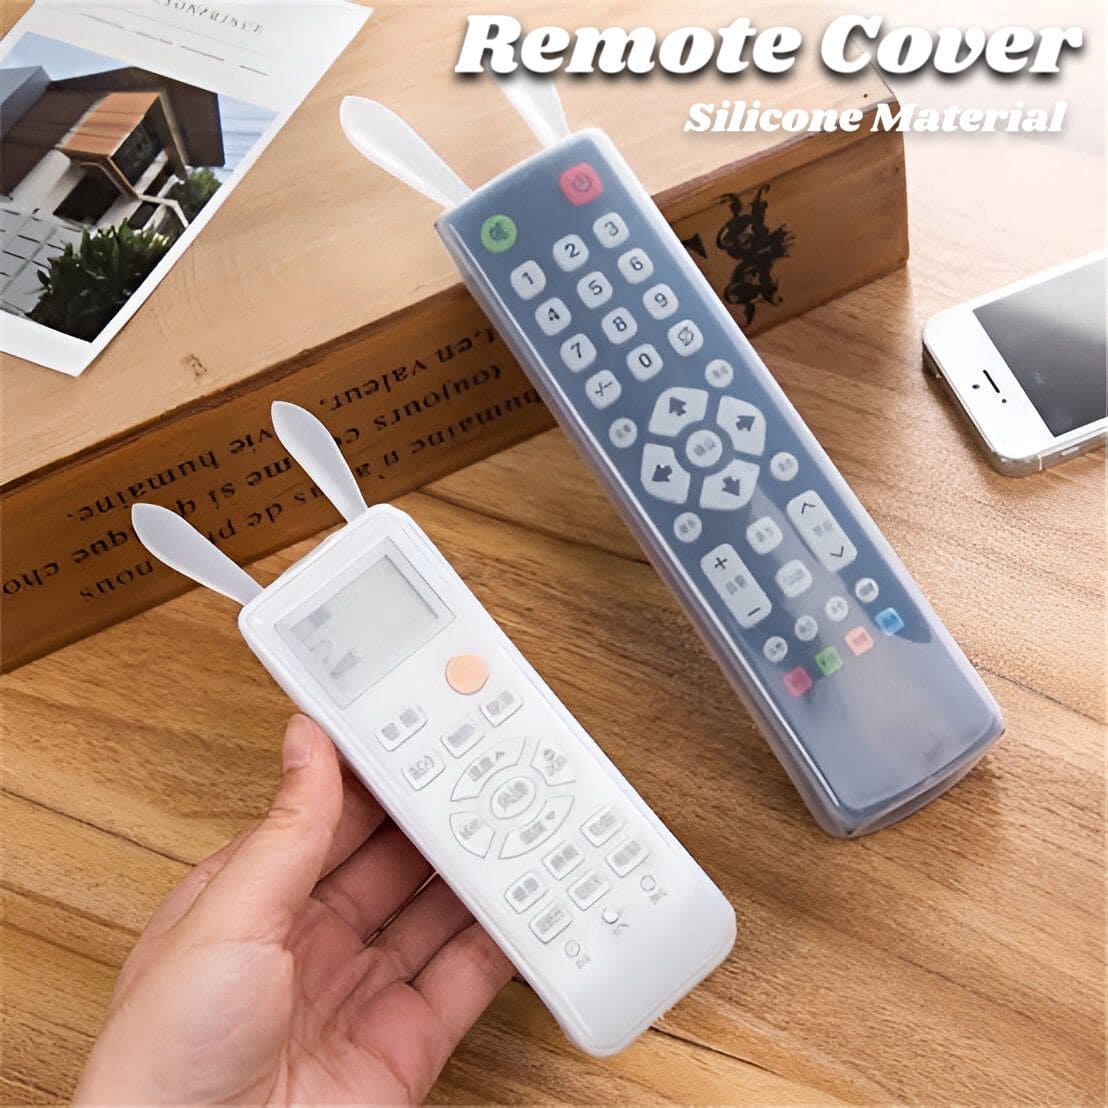 Silicon Rabbit RC Cover, Universal Home TV Remote Control Cover, Transparent Noctilucent Cover,  Waterproof Clear Protector Skin Pouch Bag, Dust-proof Anti-fall Rabbit Ear Protective Case